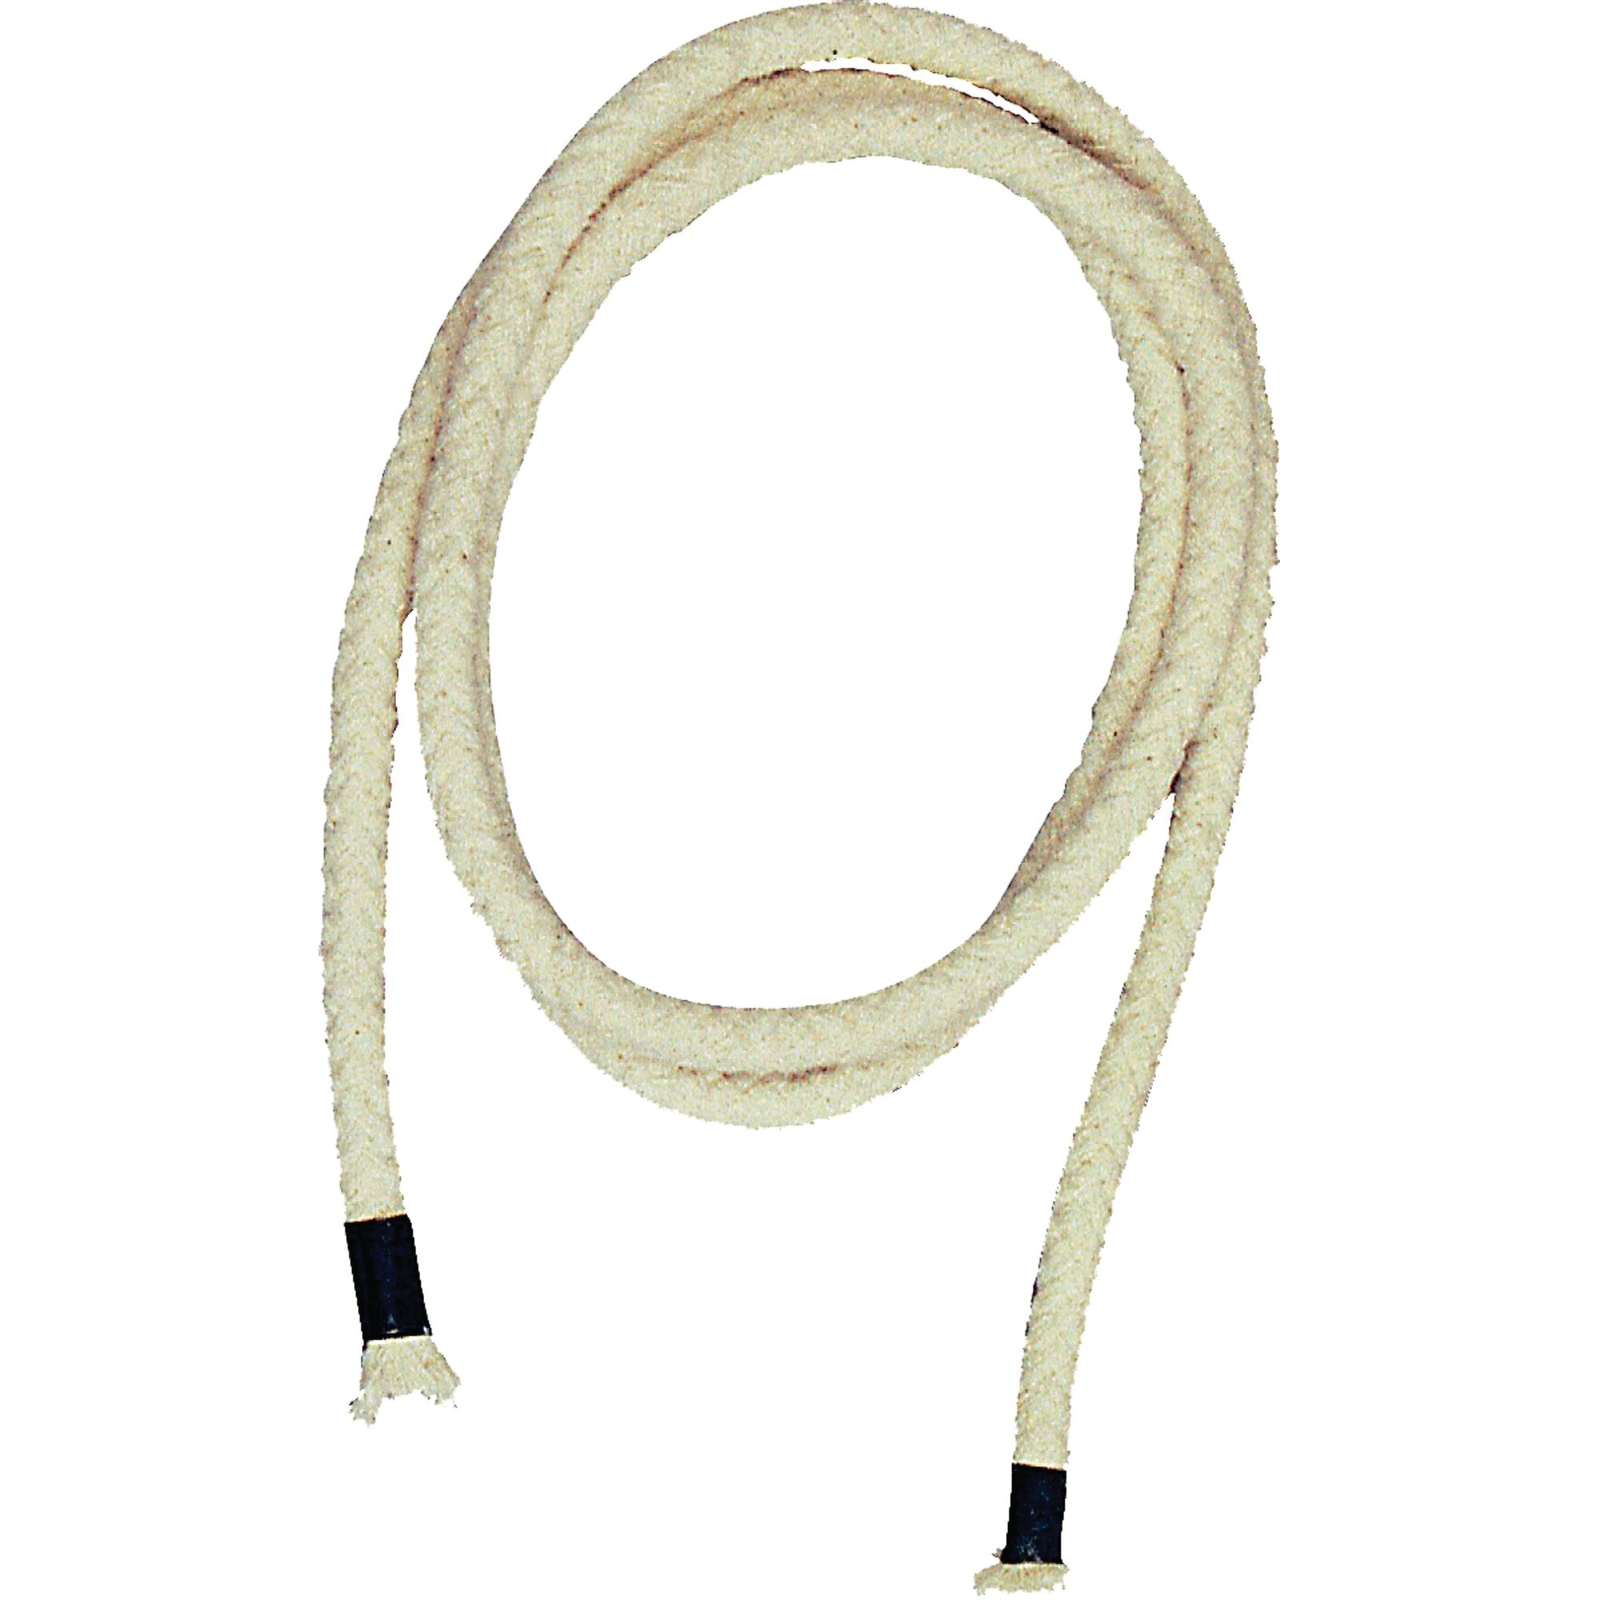 Cotton Skipping Rope - 12ft